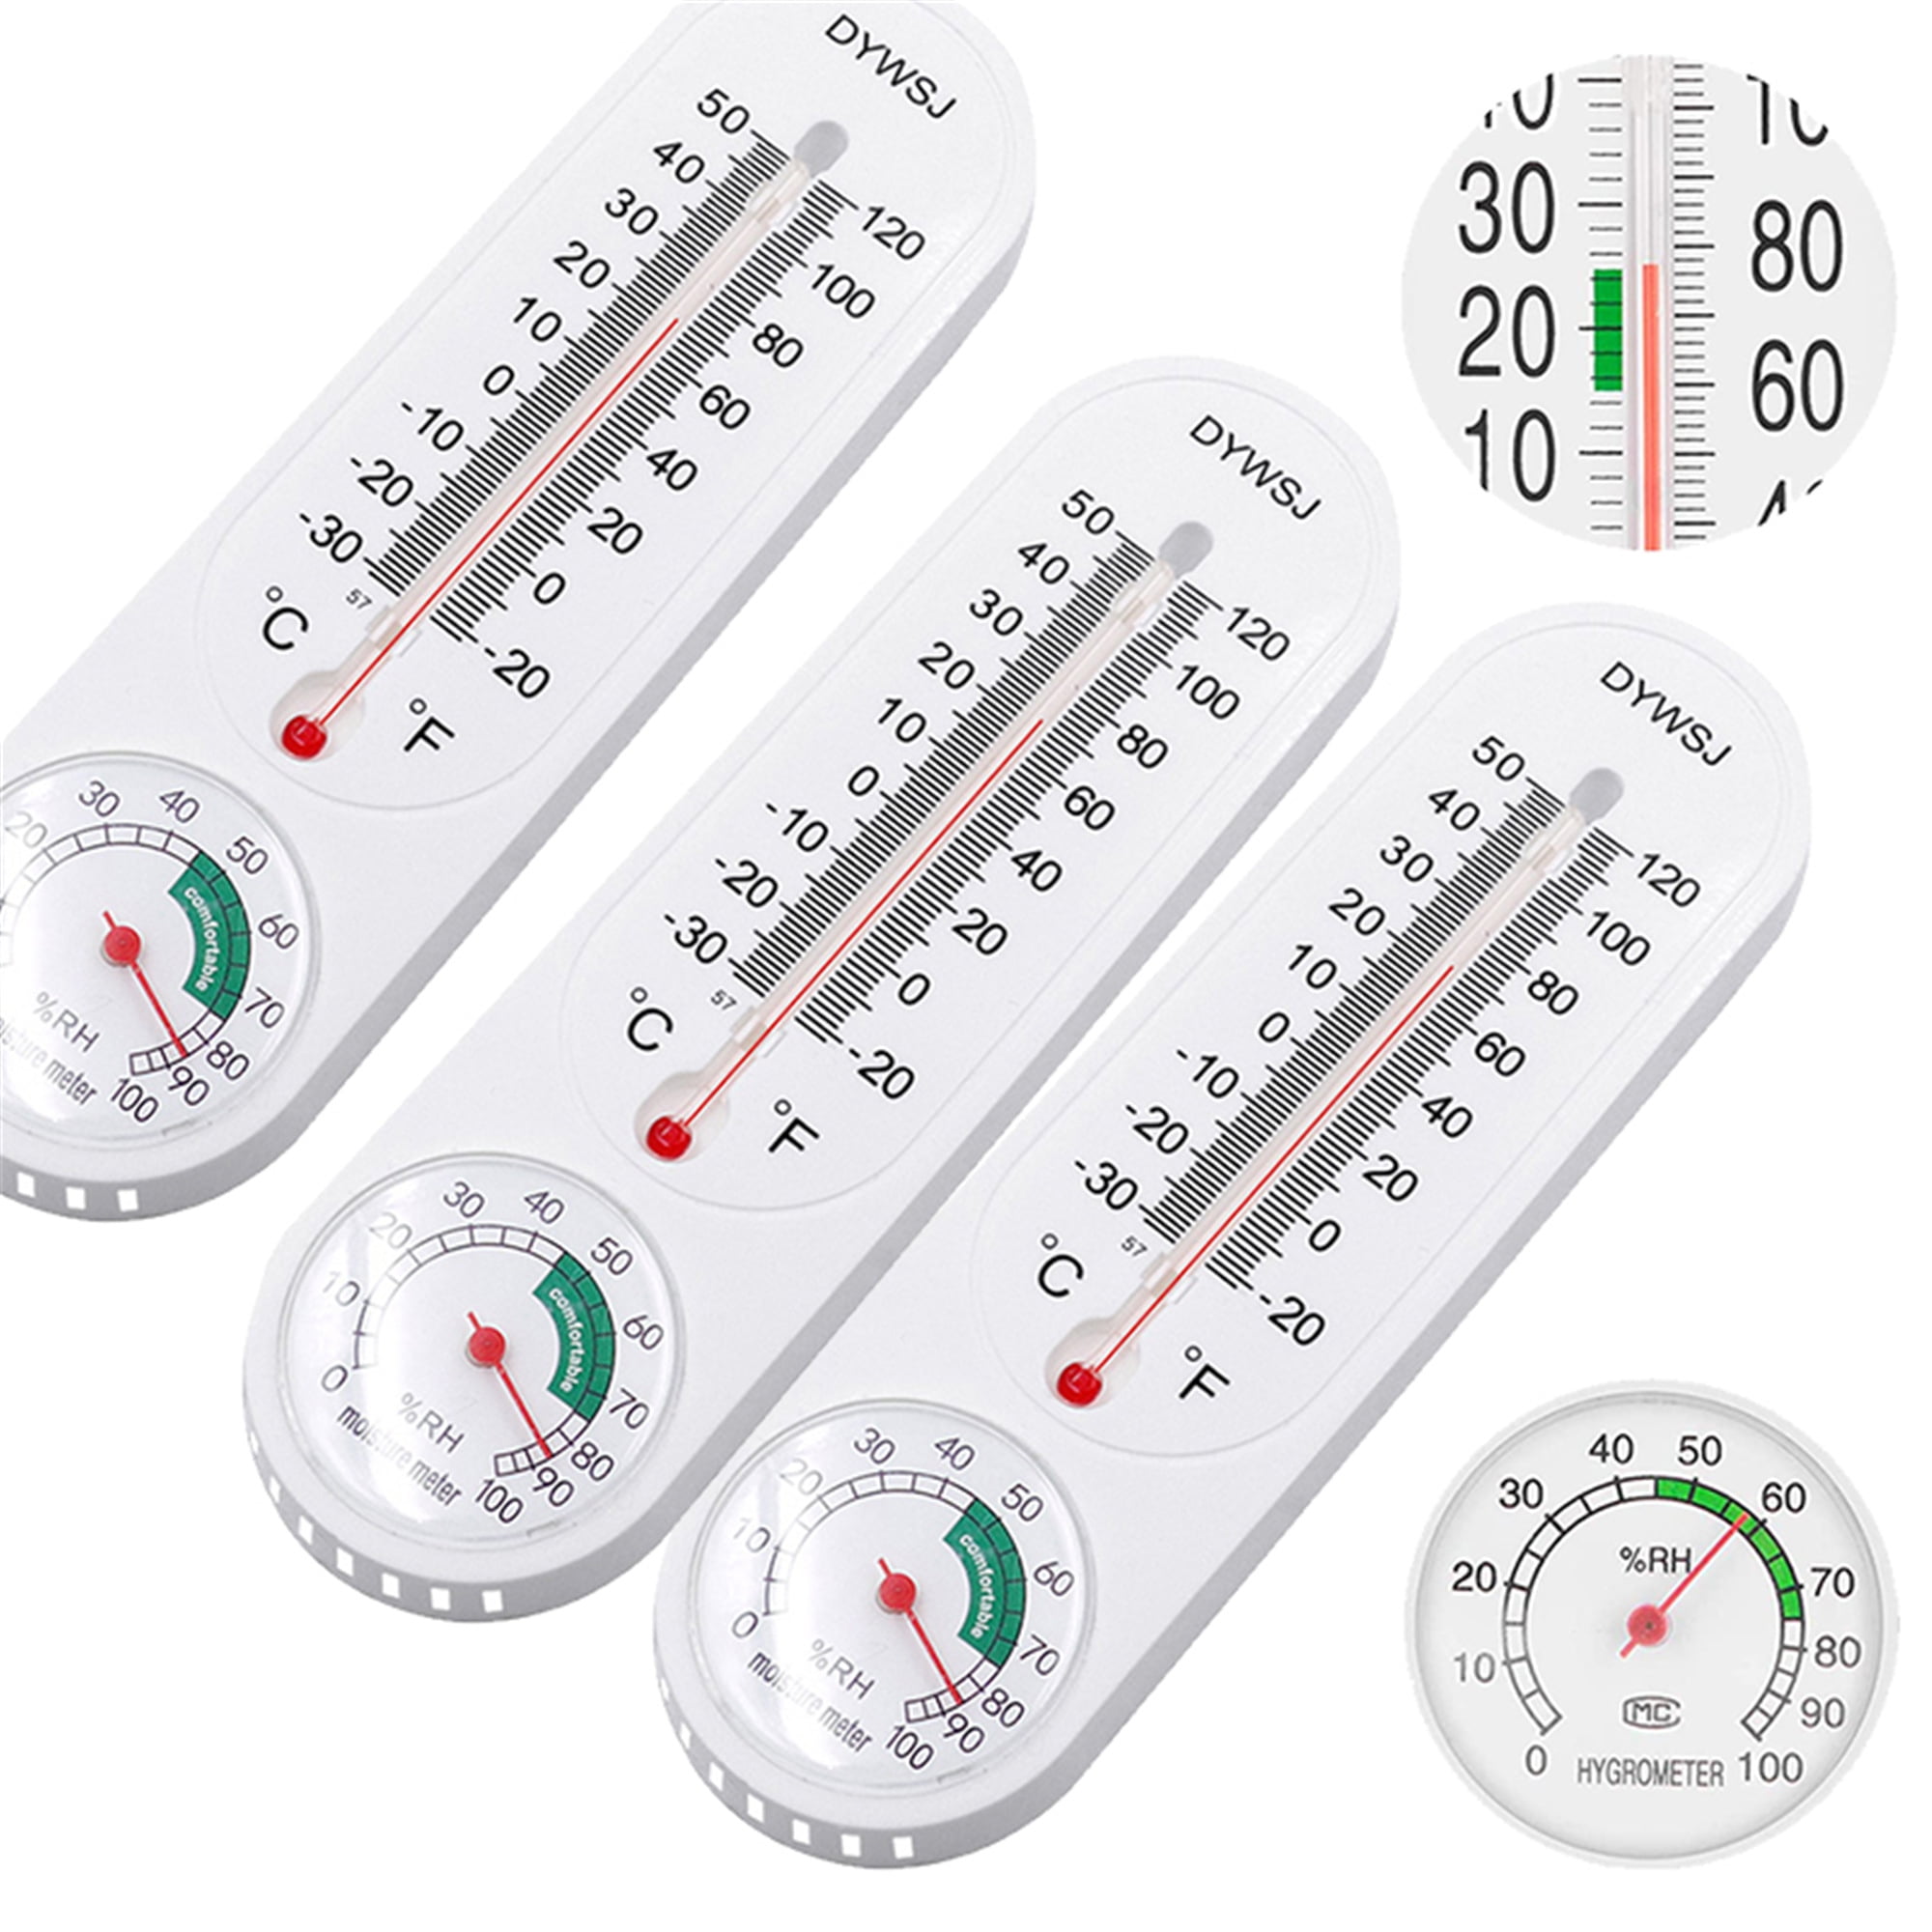 Elbourn 2-Pack Thermometer Hygrometer - Indoor Thermometer Humidity Gauge - Temperature  Humidity Sensor for Room,Plant, Greenhouse 